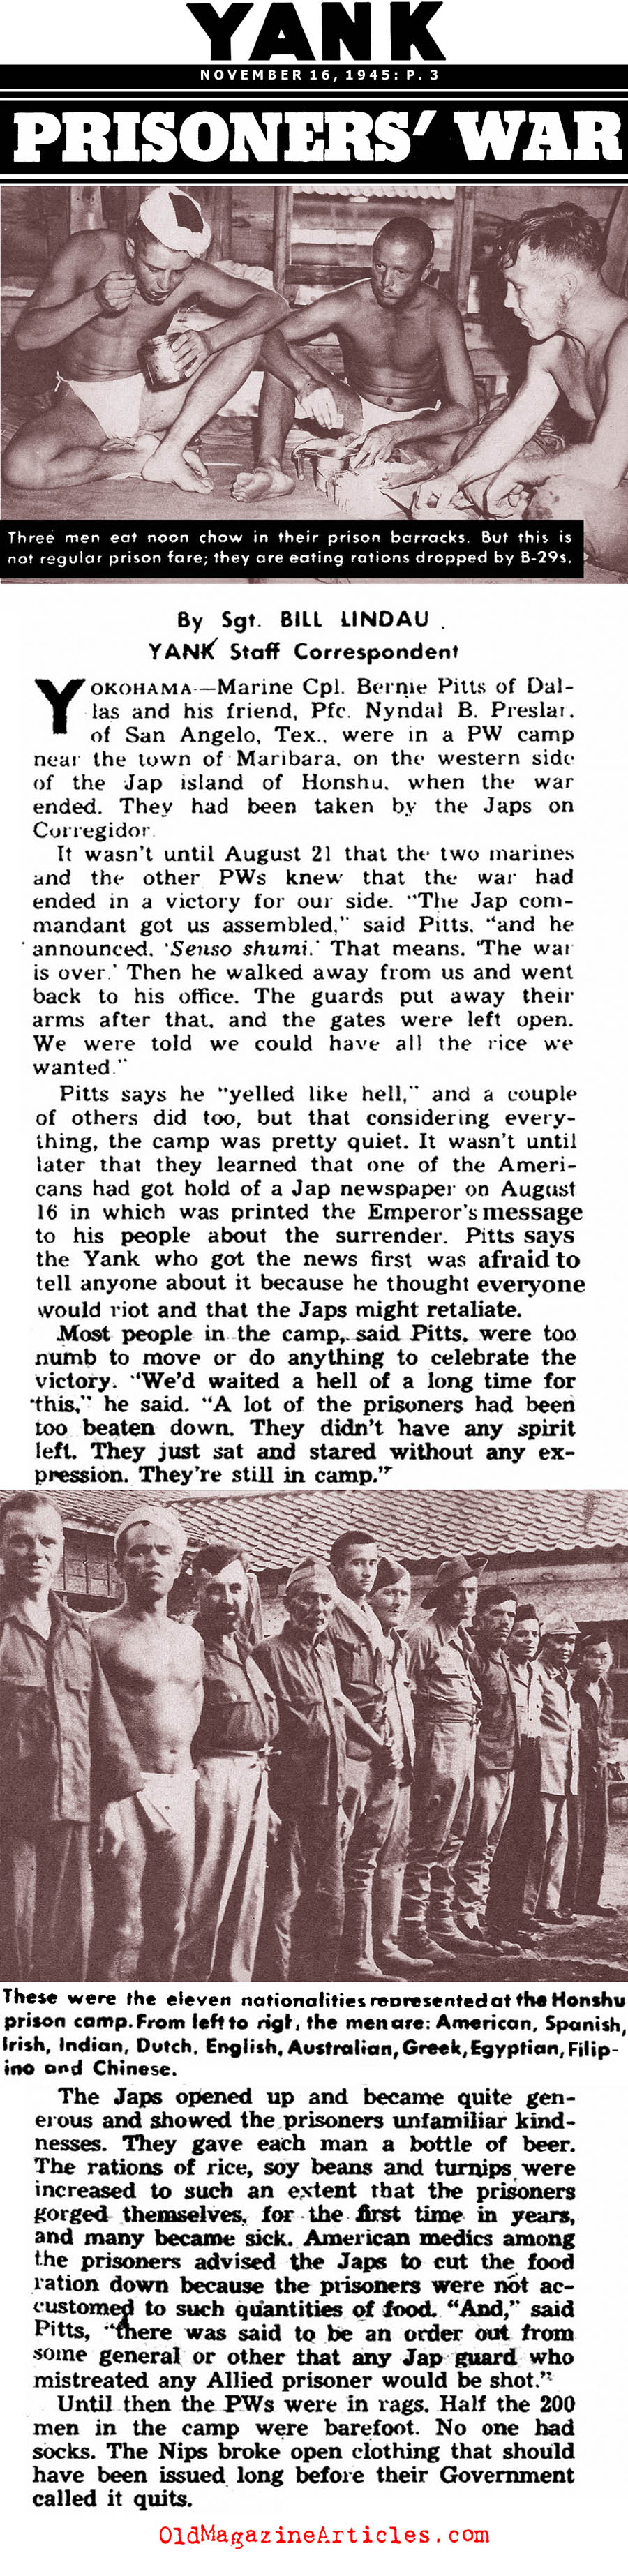 Americans Tell of Japanese Prison Camps (Yank Magazine, 1945)